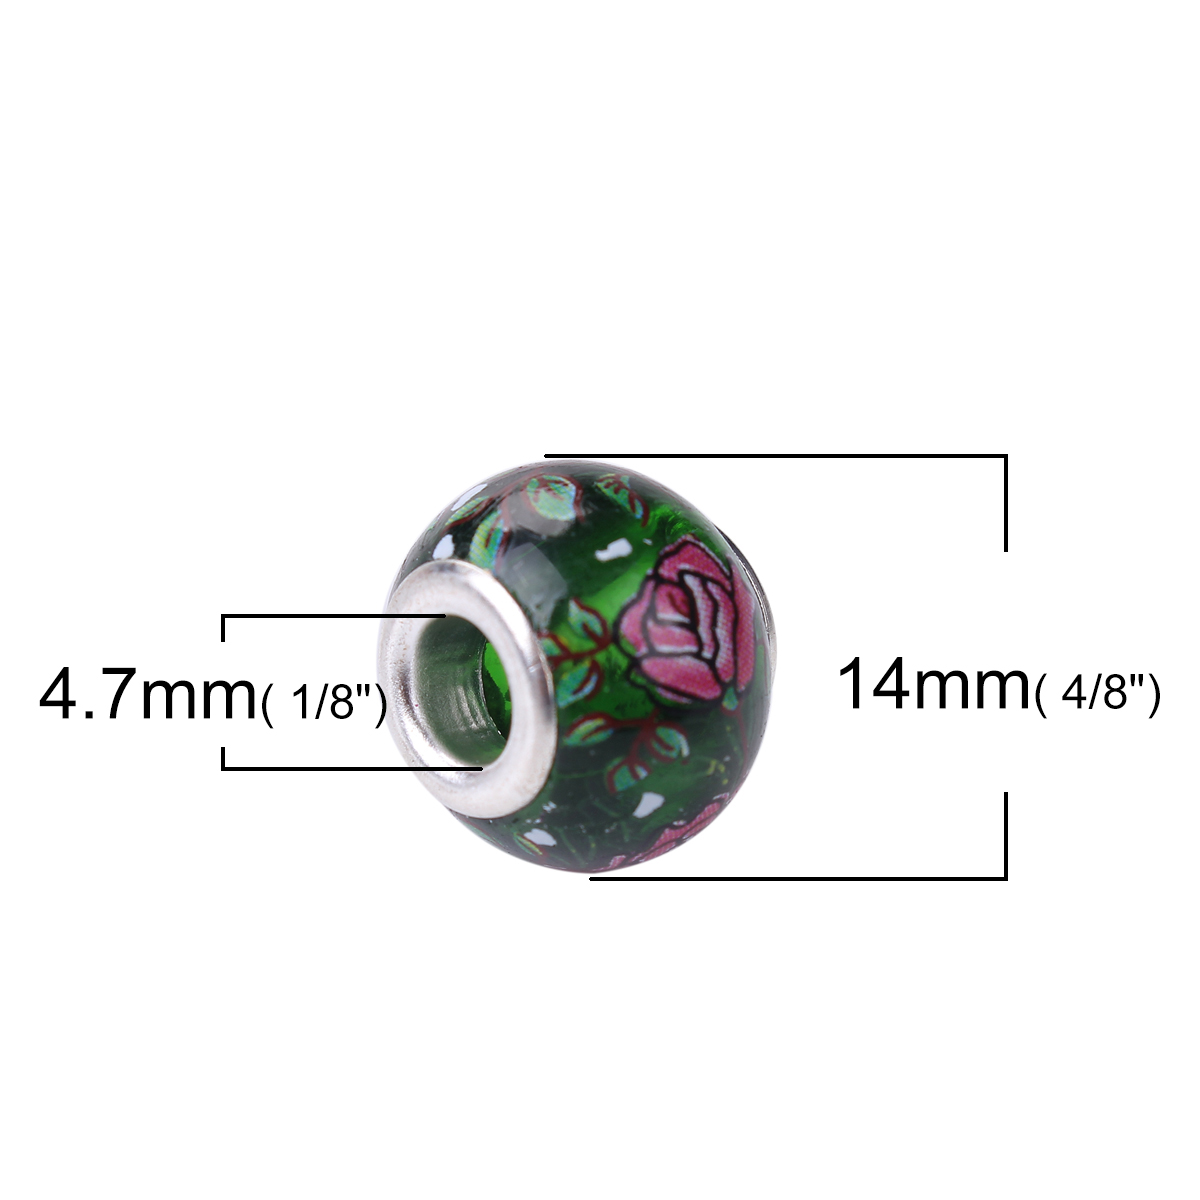 Picture of Glass Japan Painting Vintage Japanese Tensha European Style Large Hole Charm Beads Round Silver Plated Rose Flower Dark Green Transparent About 14mm( 4/8") Dia, Hole: Approx 4.7mm, 5 PCs